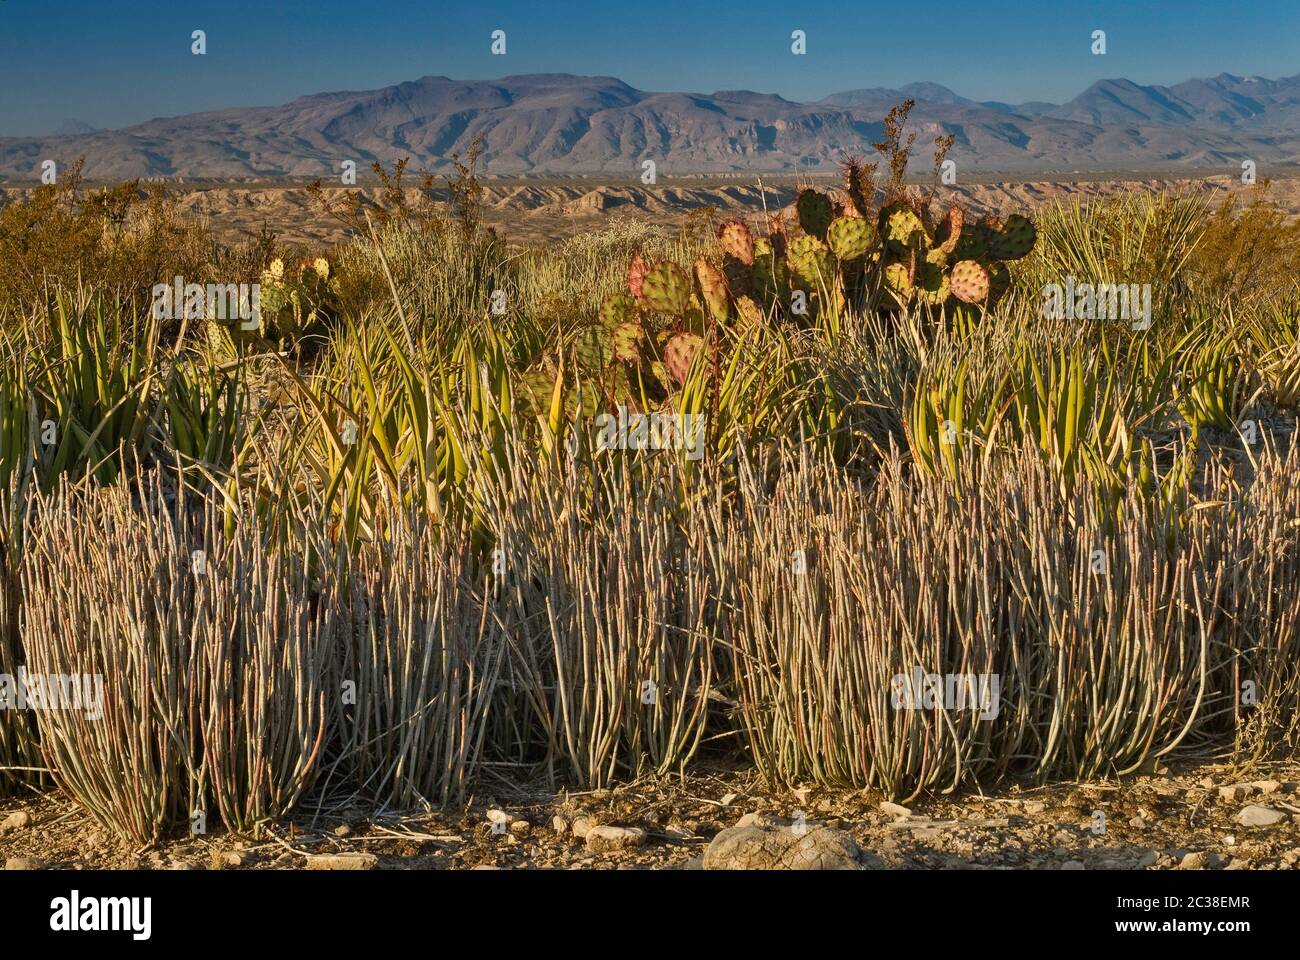 Candelillas, lechuguilla agaves and prickly pears, Chisos Mountains in dist, Old Ore Road at Chihuahuan Desert in Big Bend National Park, Texas, USA Stock Photo